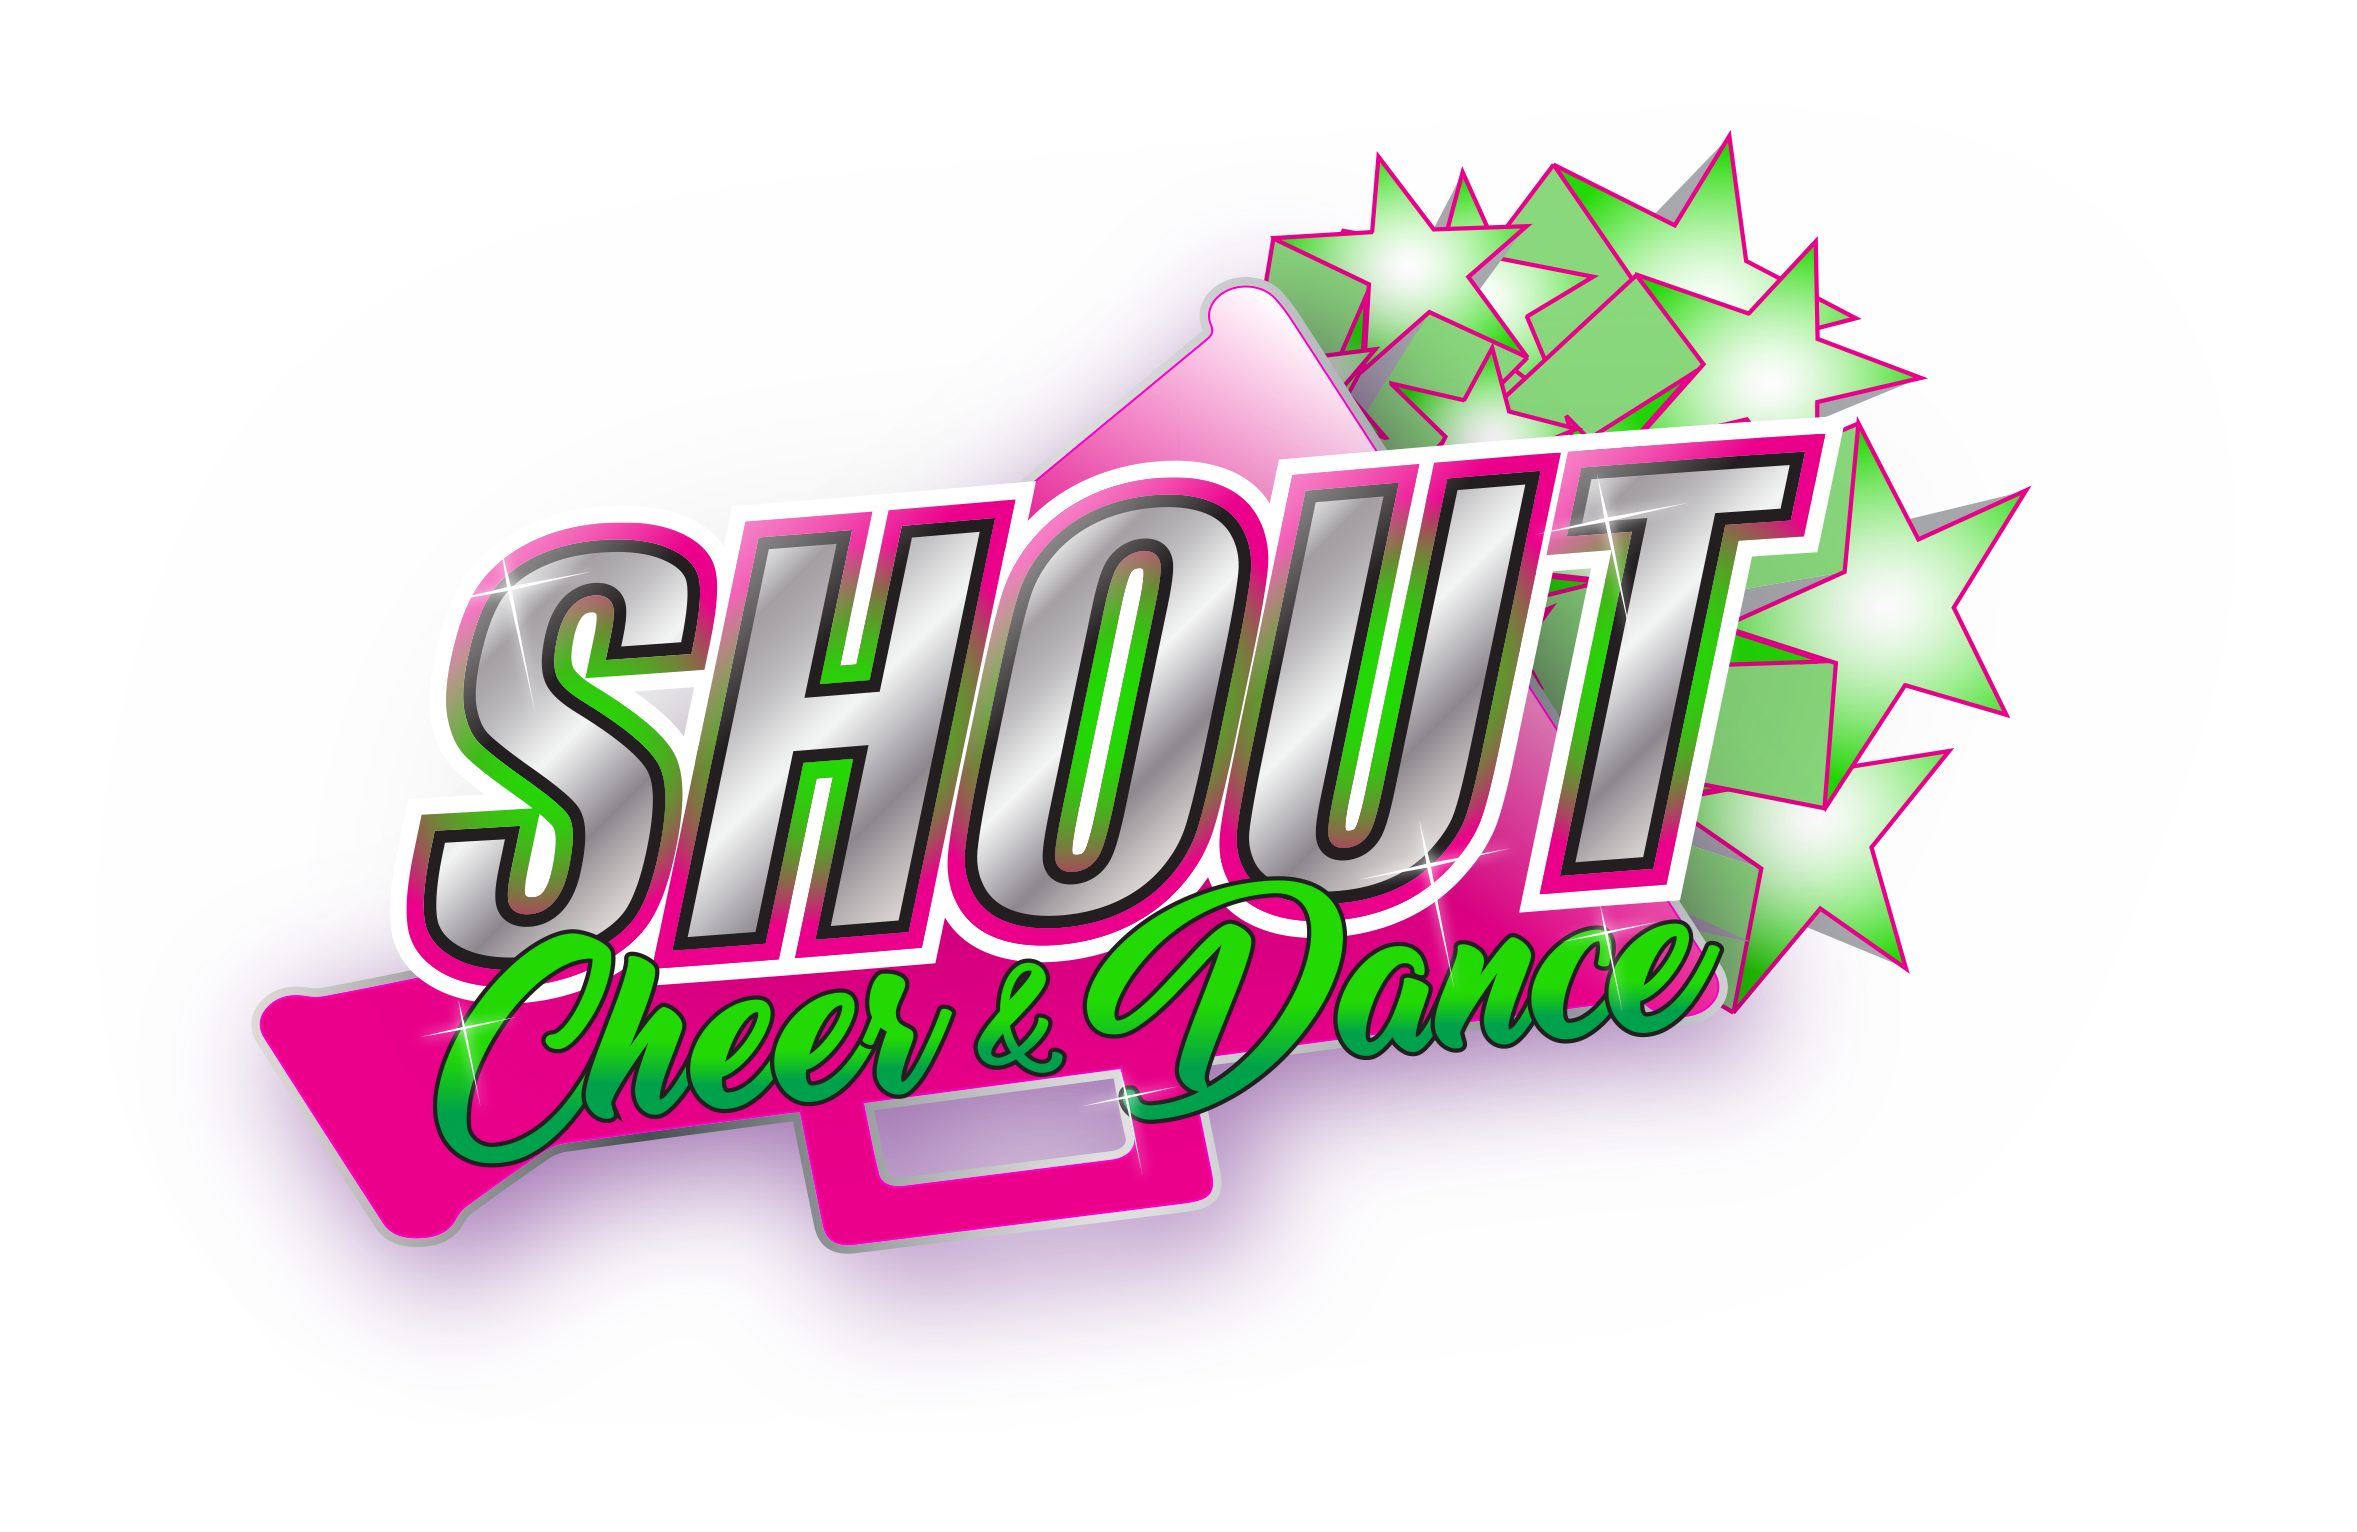 Shout cheer and dance